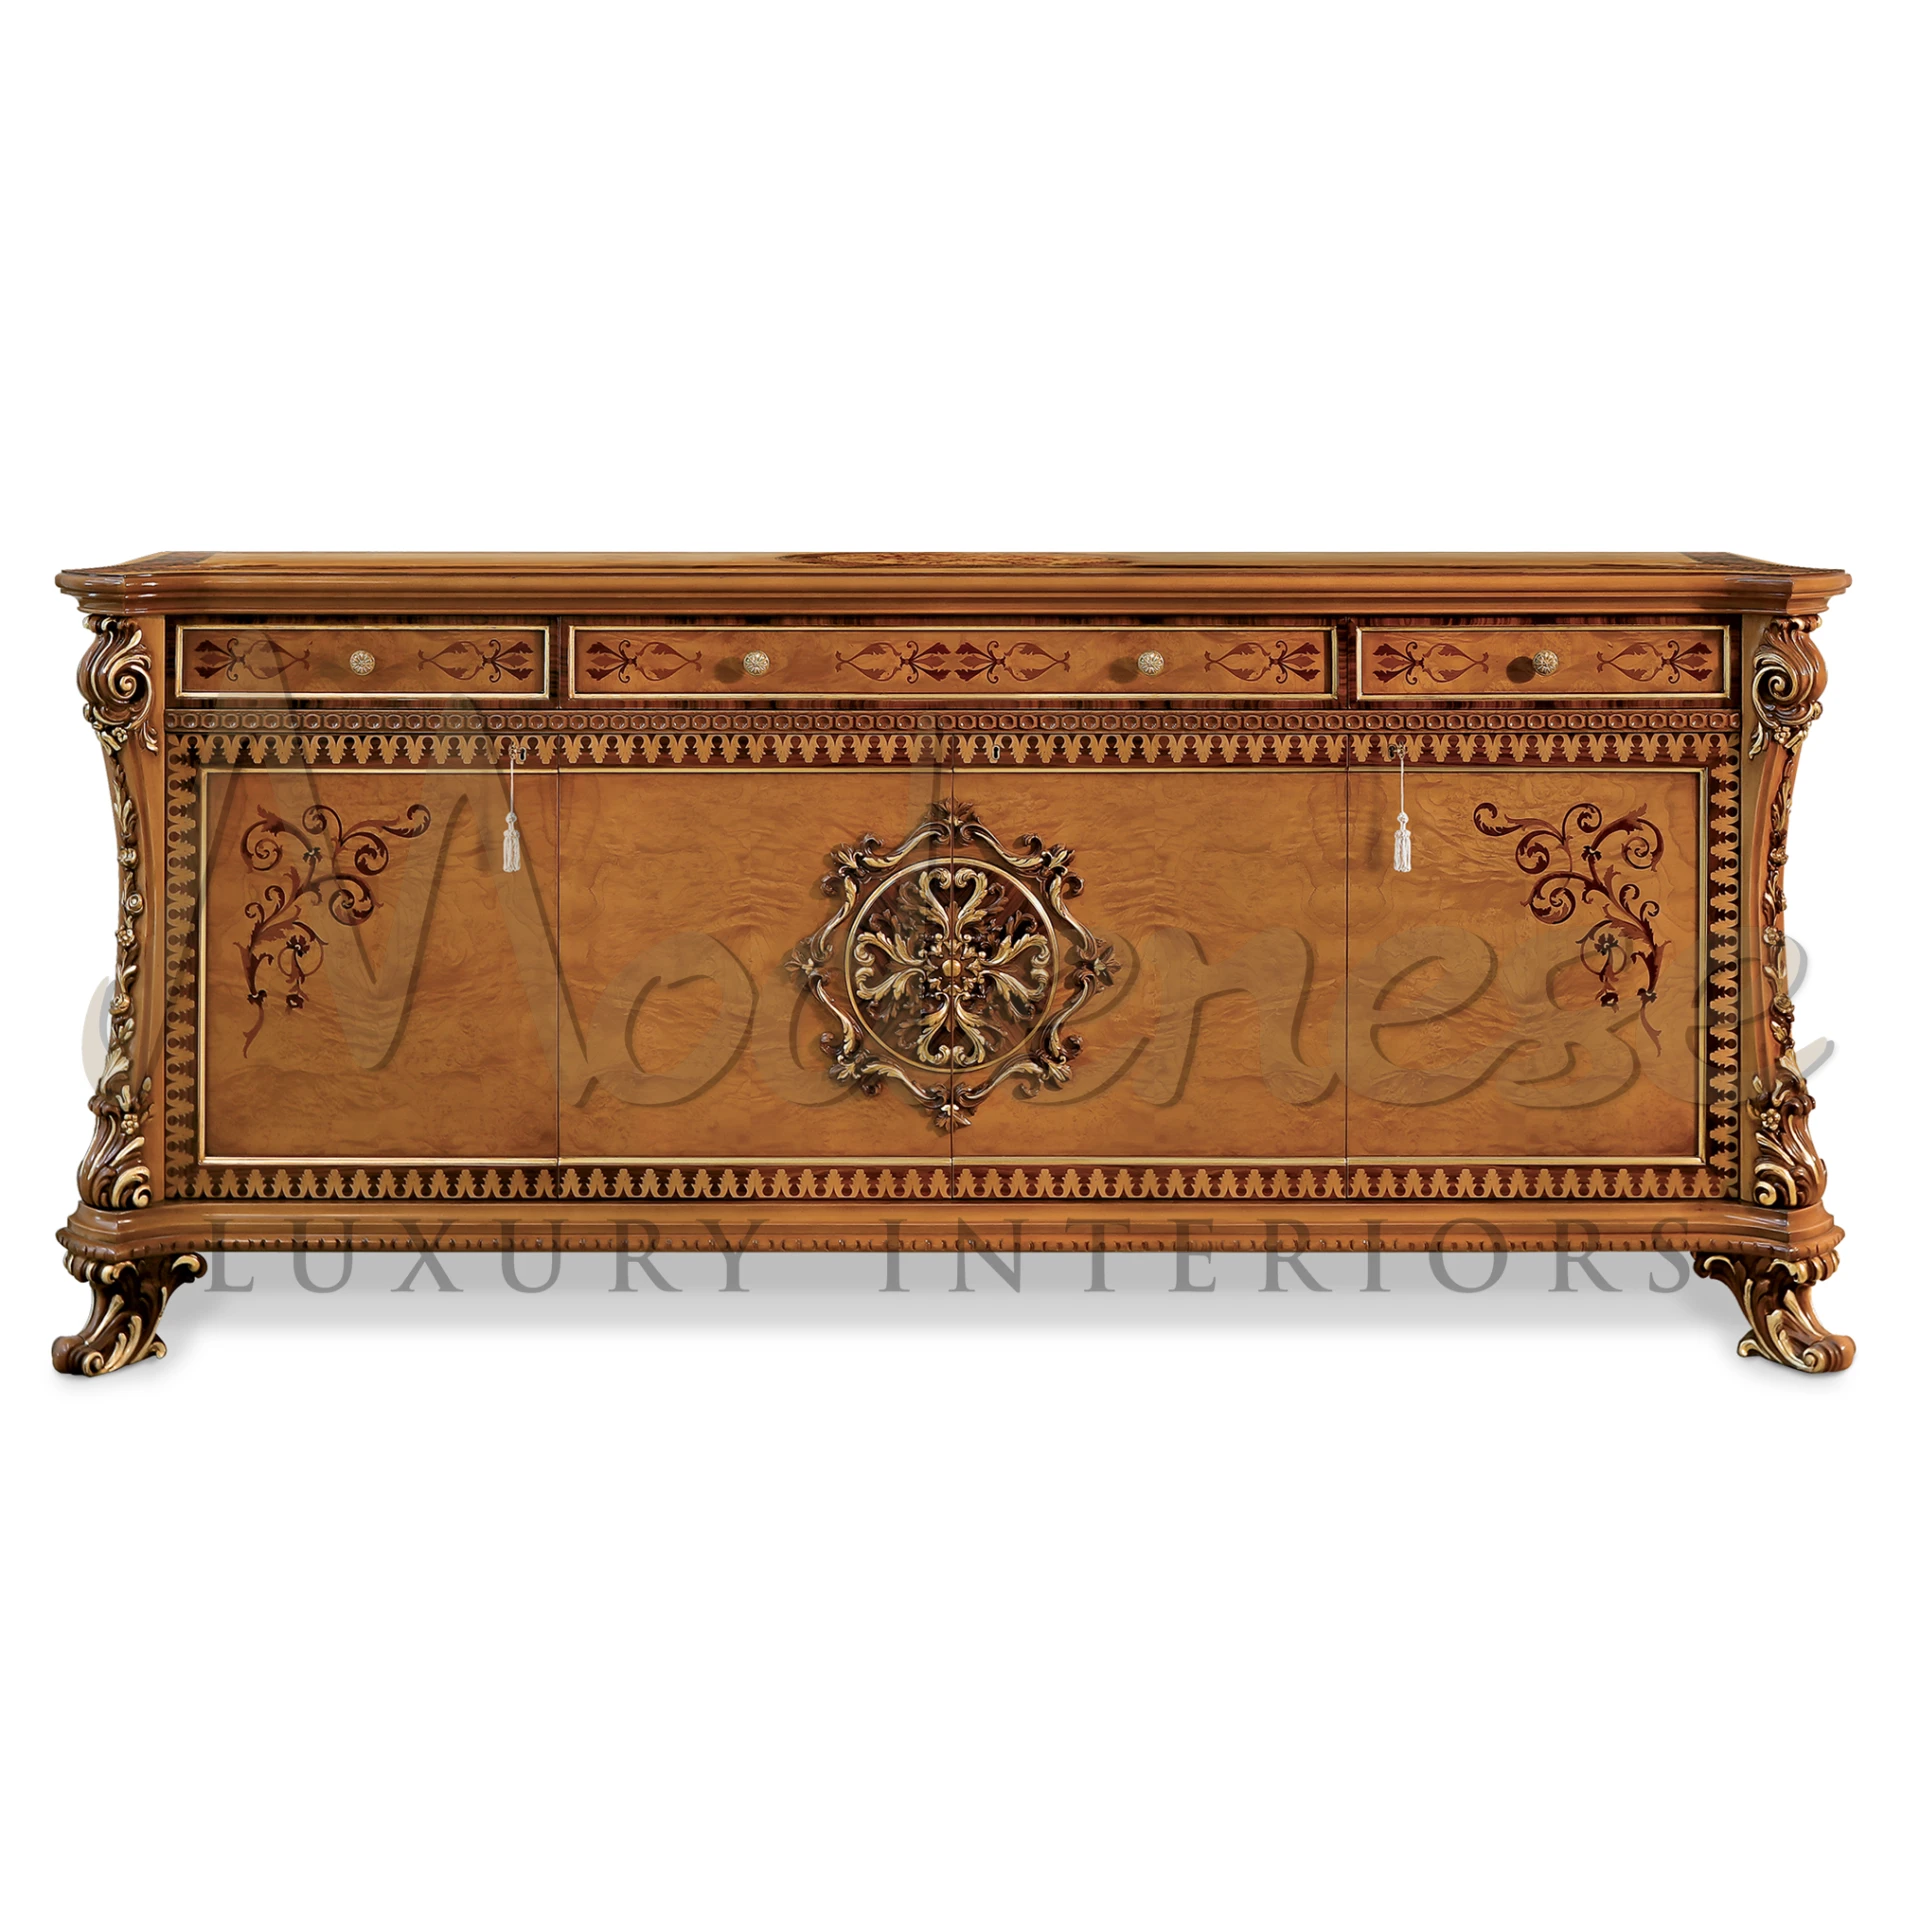 A masterpiece of Italian woodwork, the Baroque Style Sideboard